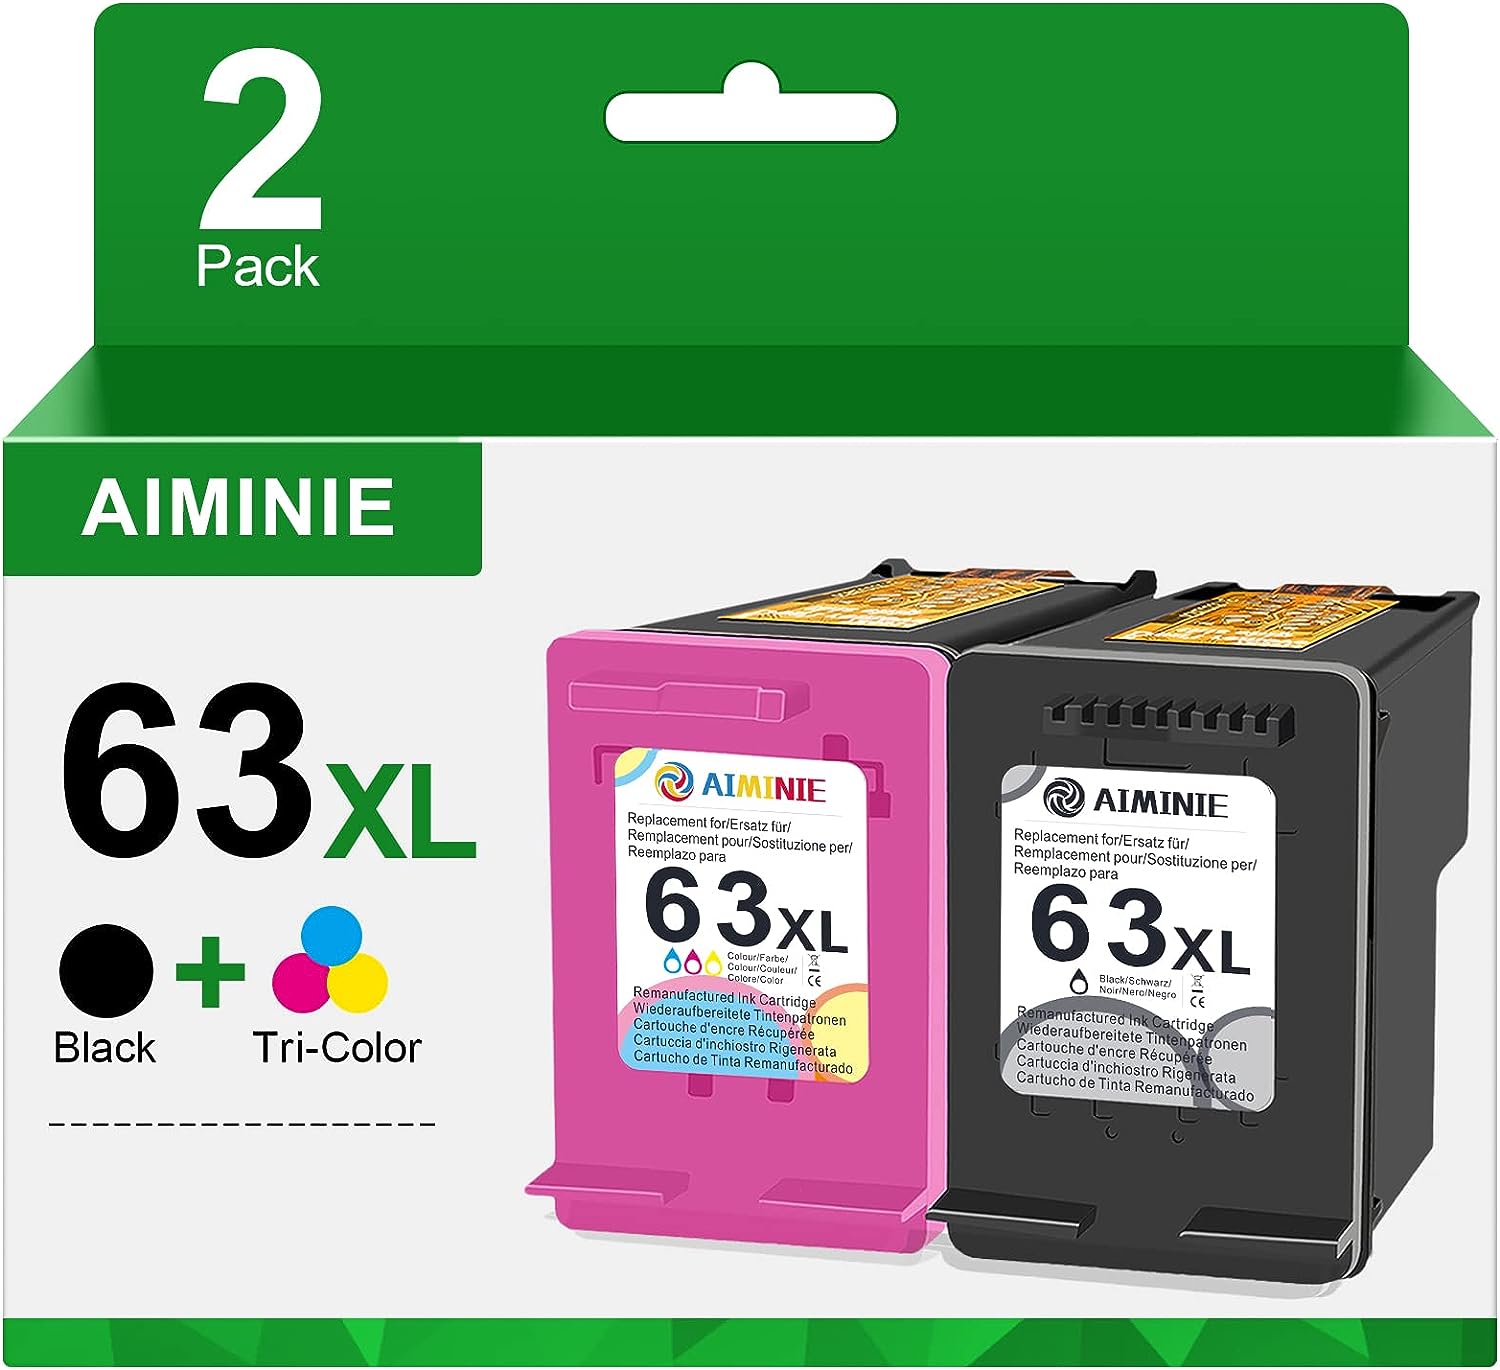 AIMINIE Replacement for HP Officejet 5258 5252 5200 [...]